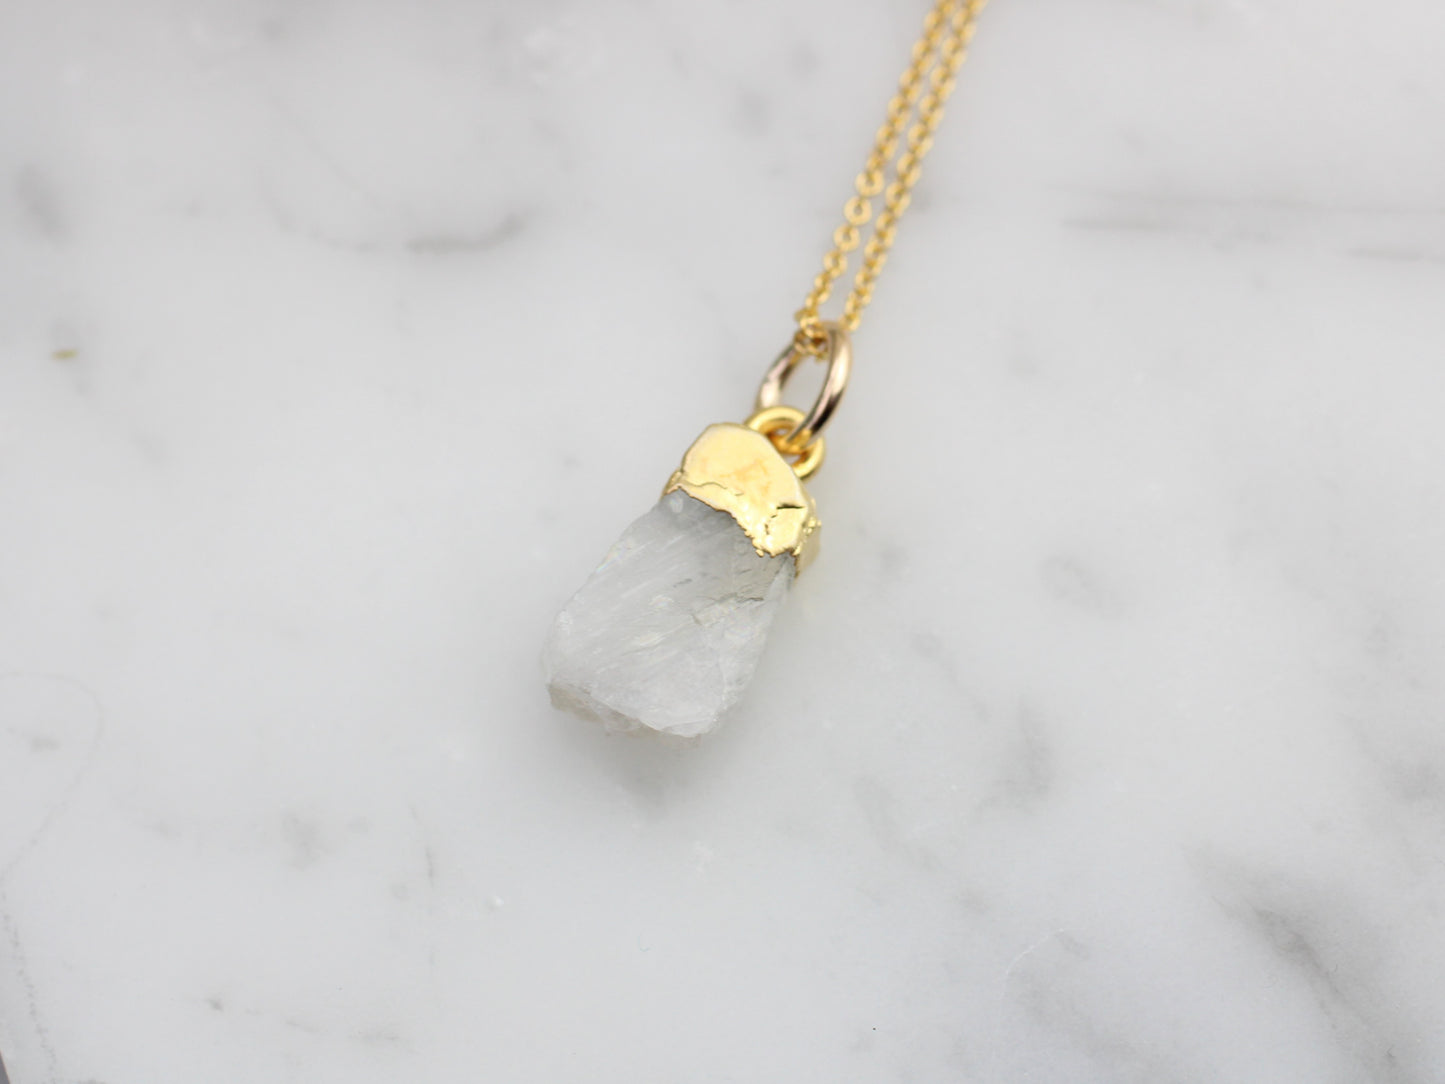 Gold moonstone necklace. June birthstone necklace.